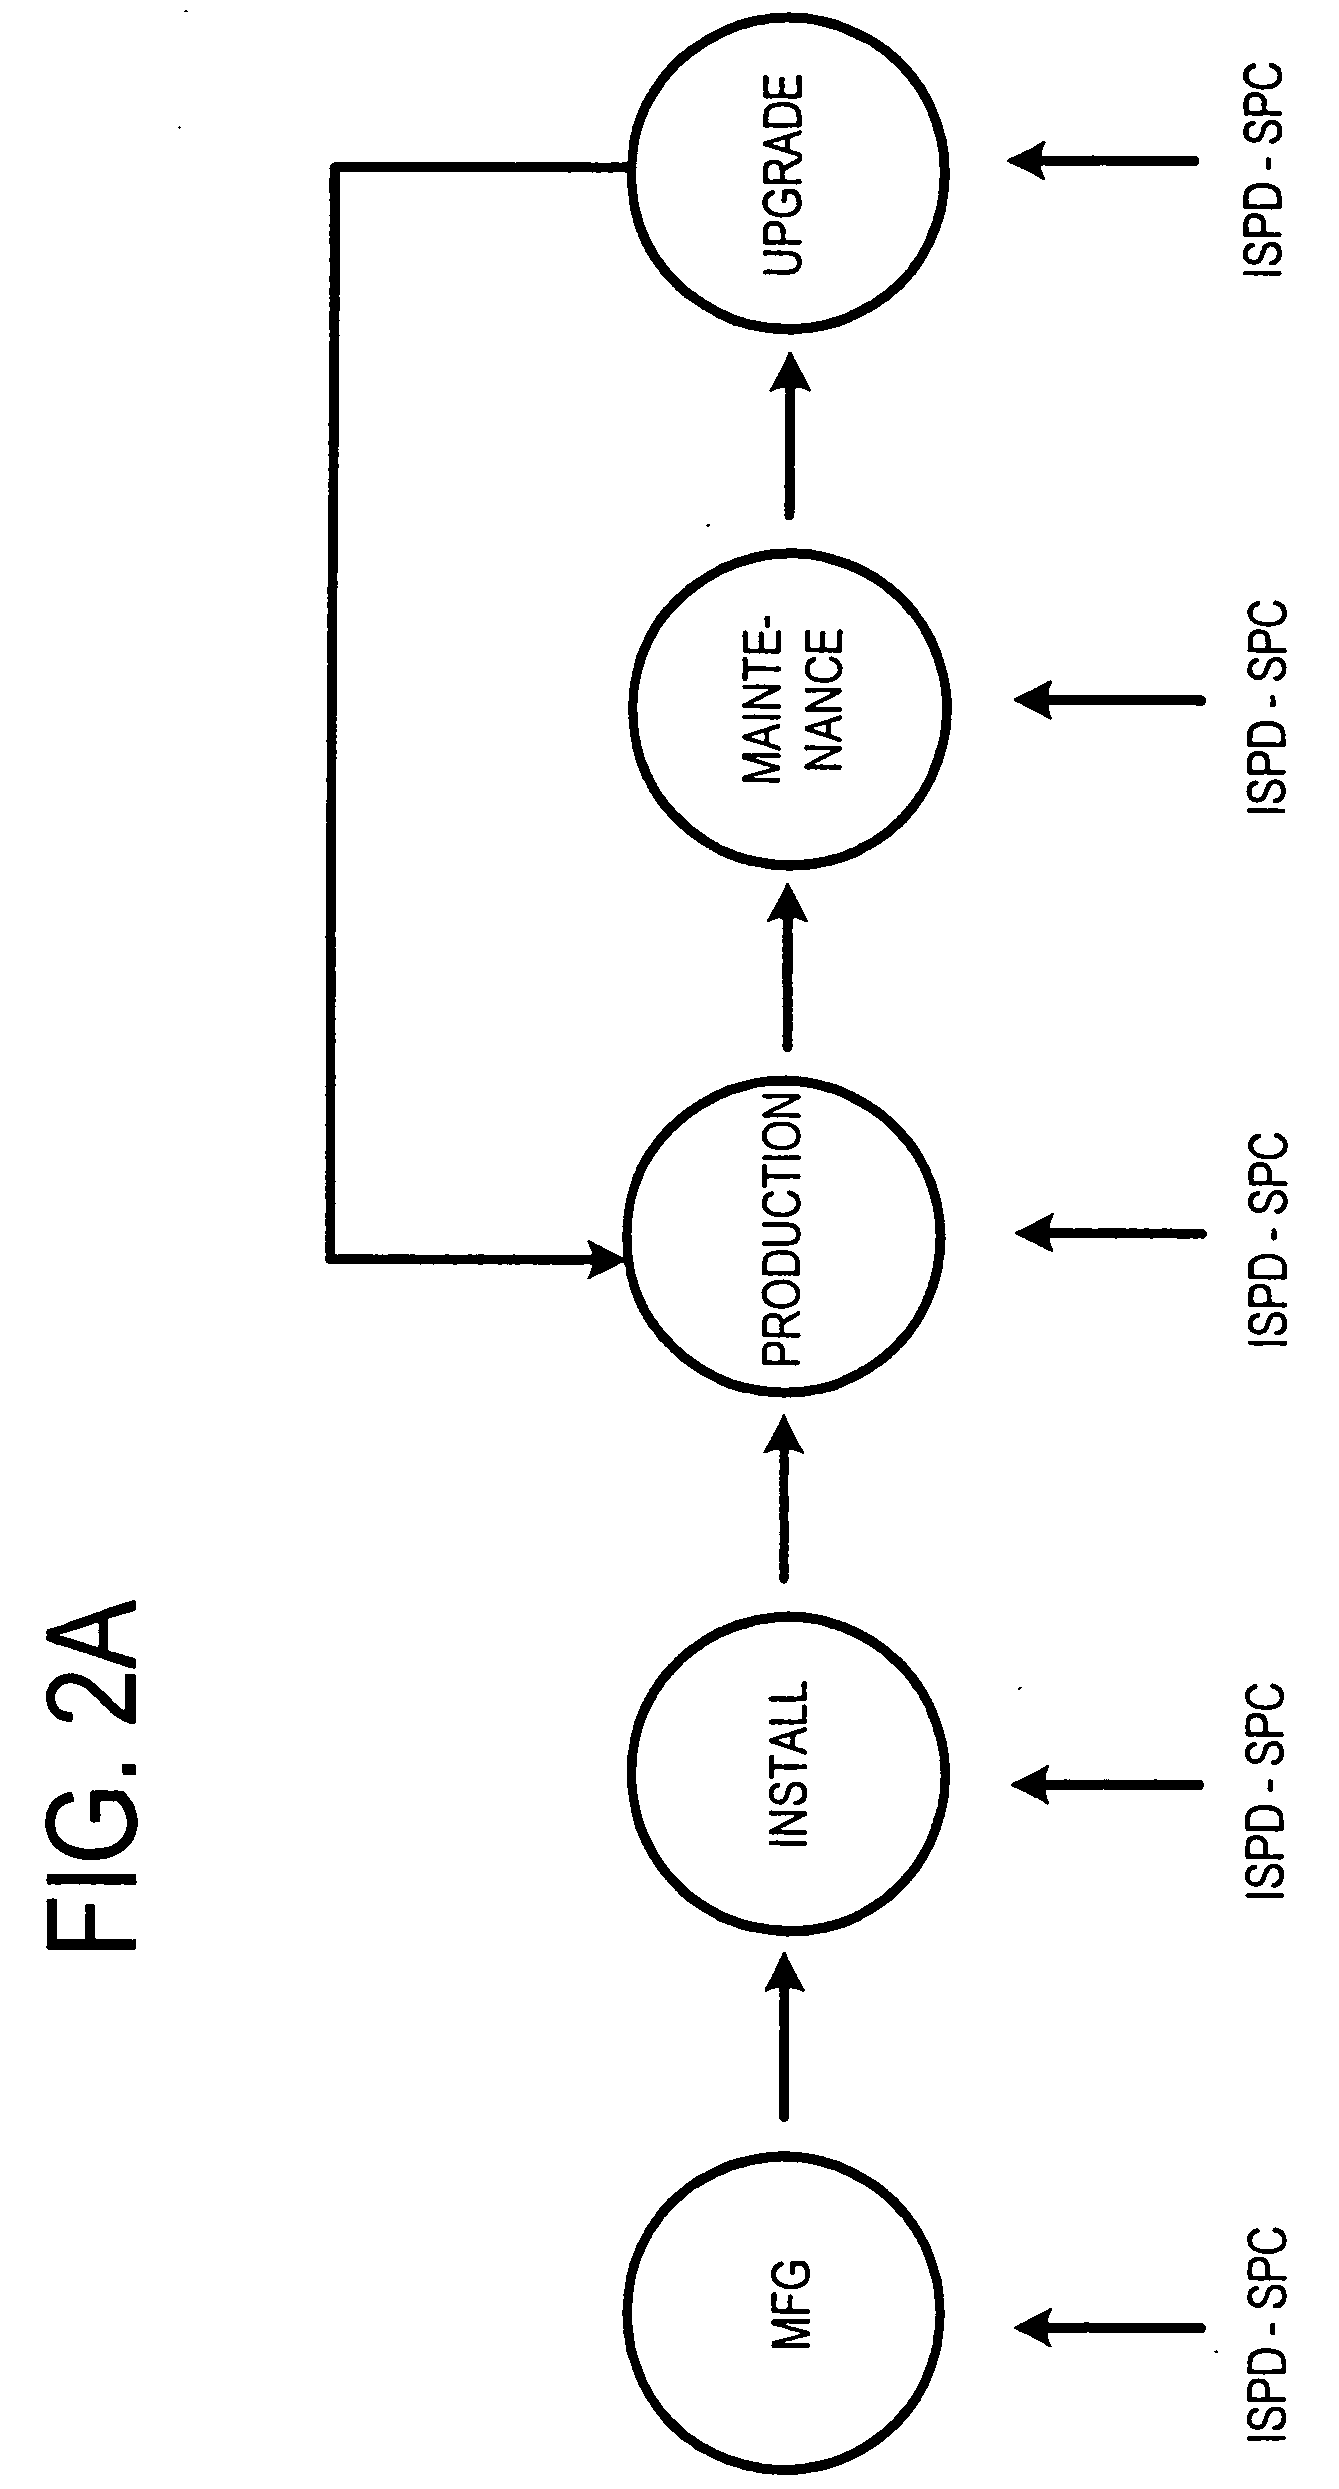 Integrated stepwise statistical process control in a plasma processing system